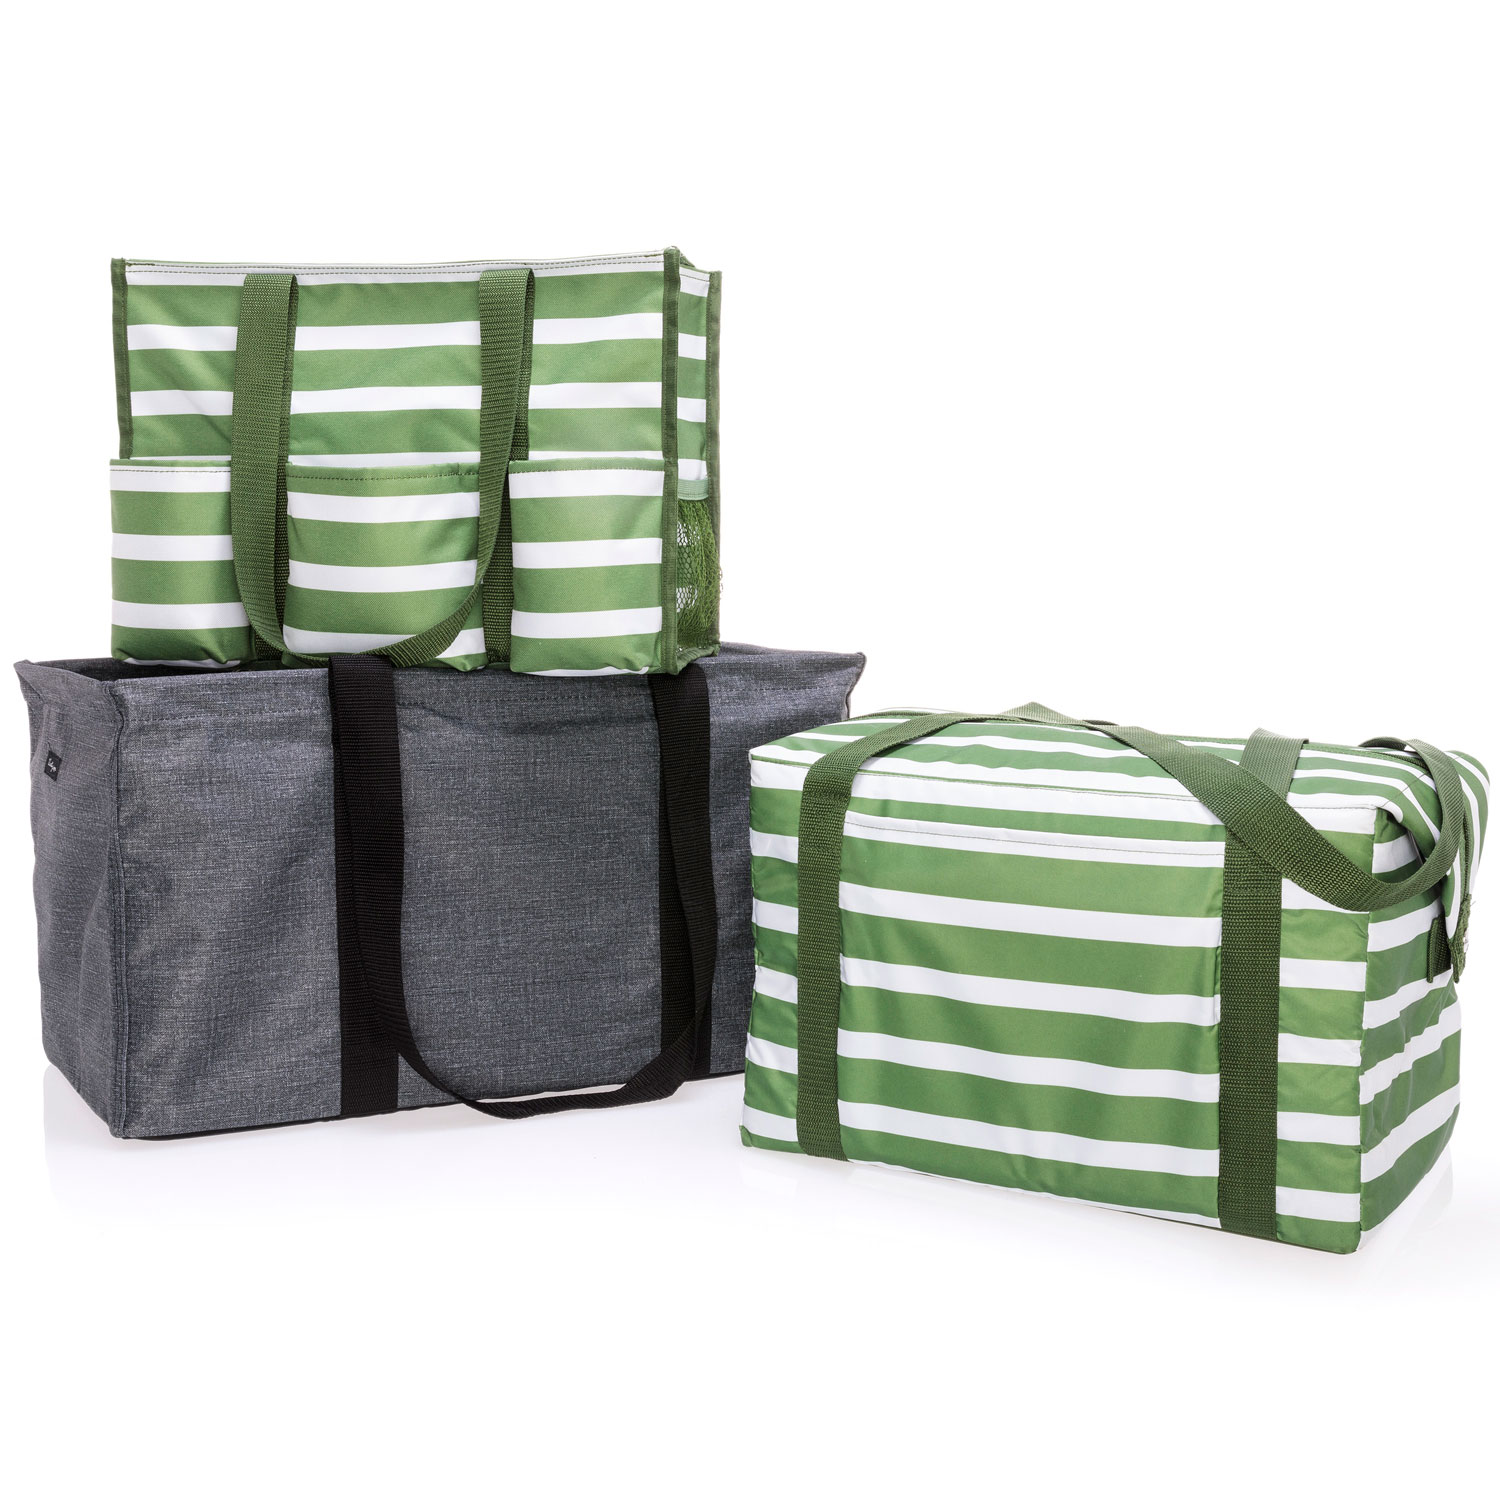 Thirty-One Gifts Organizing Utility Tote and Thermal Tote Review! - Viva  Veltoro